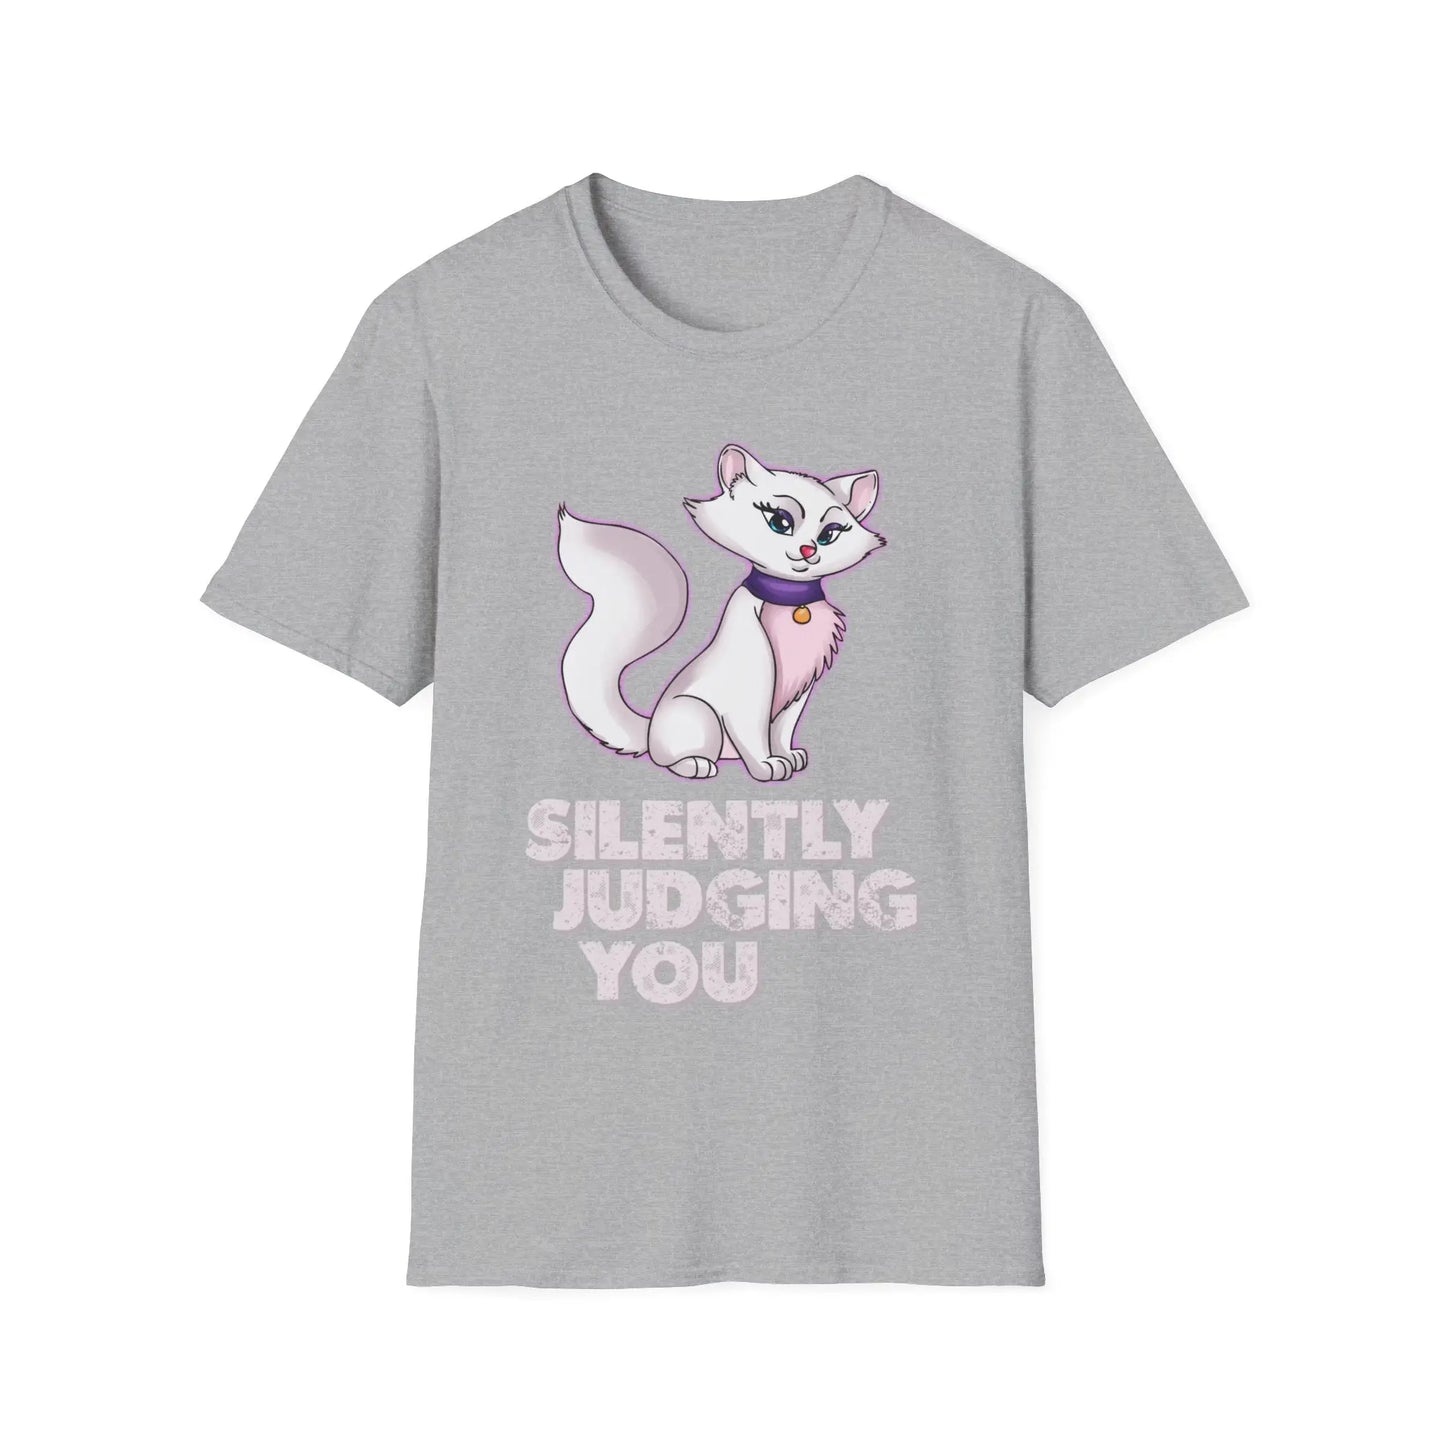 Silently Judging You Women's Tee - Wicked Tees